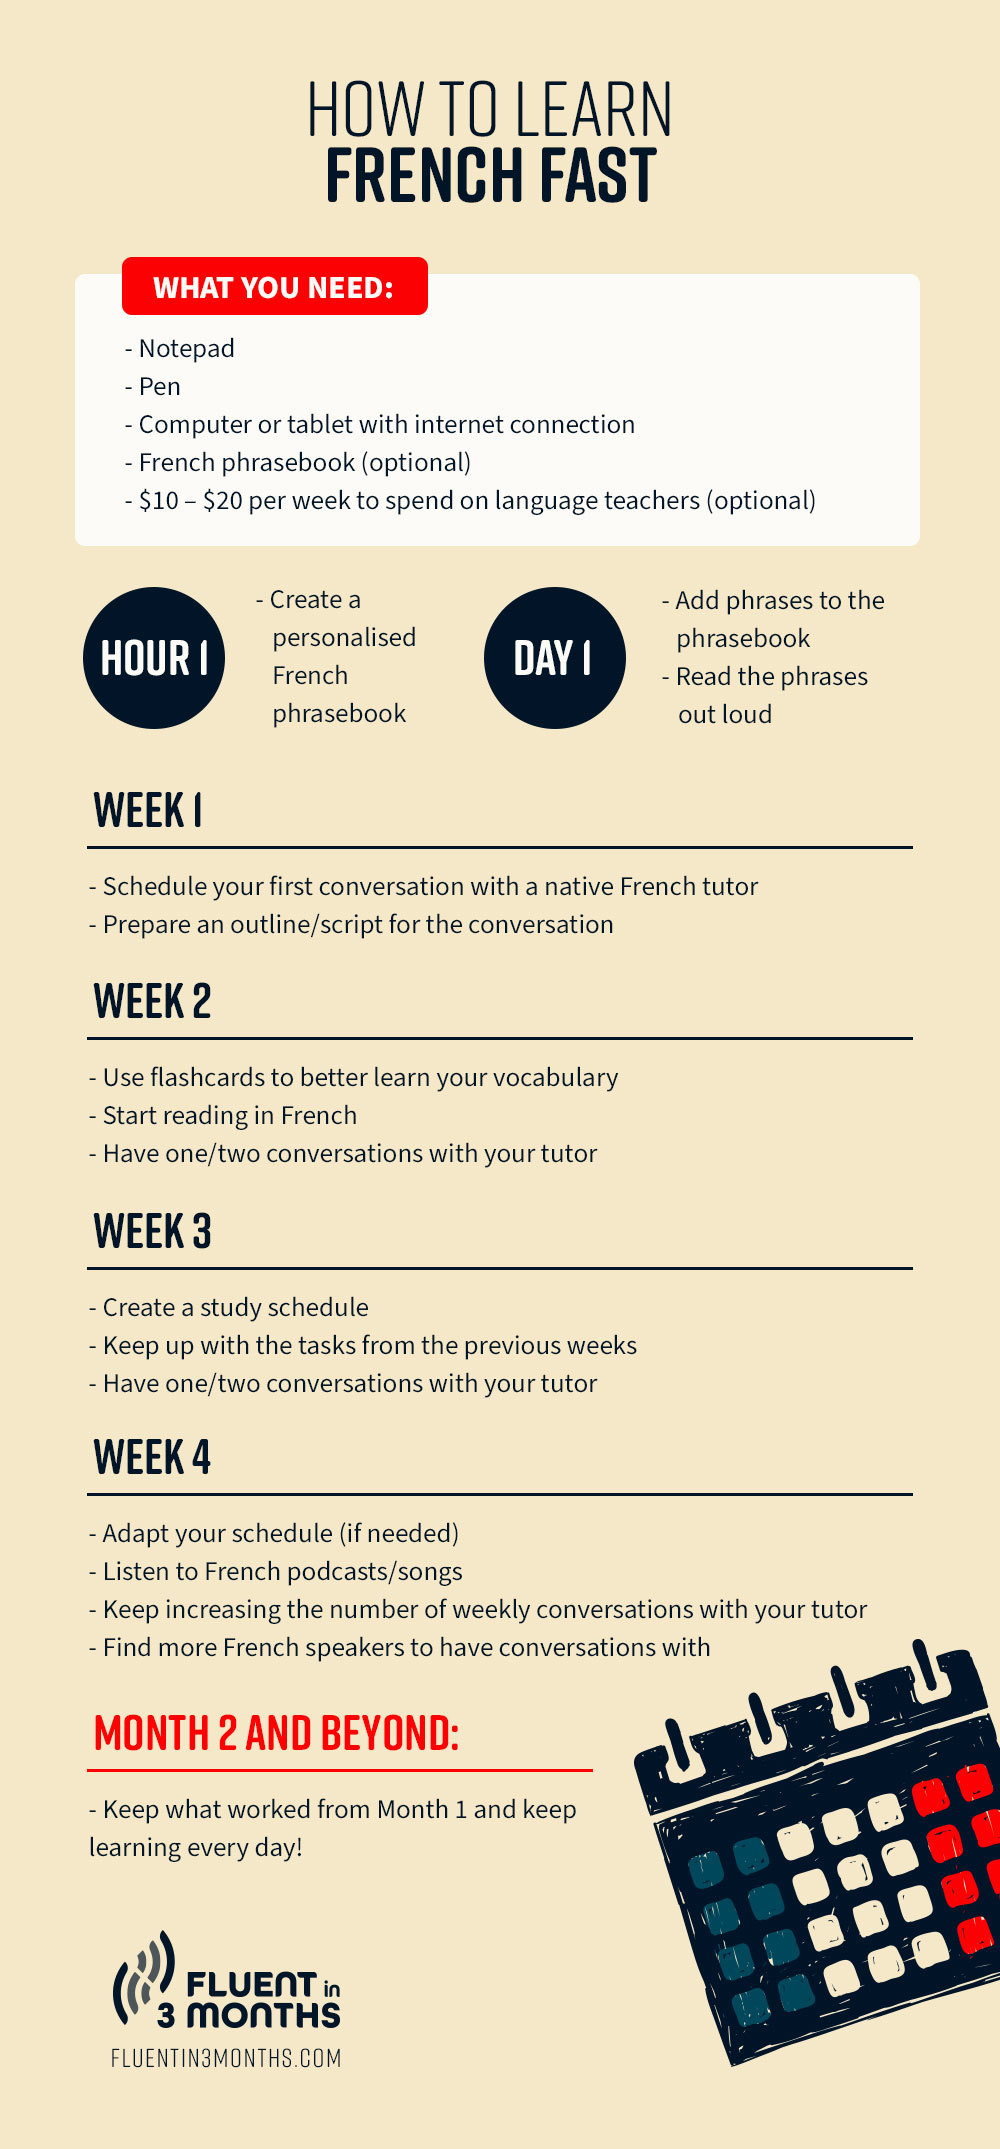 How To Learn French Fast: The Step-By-Step Guide For Your First Month